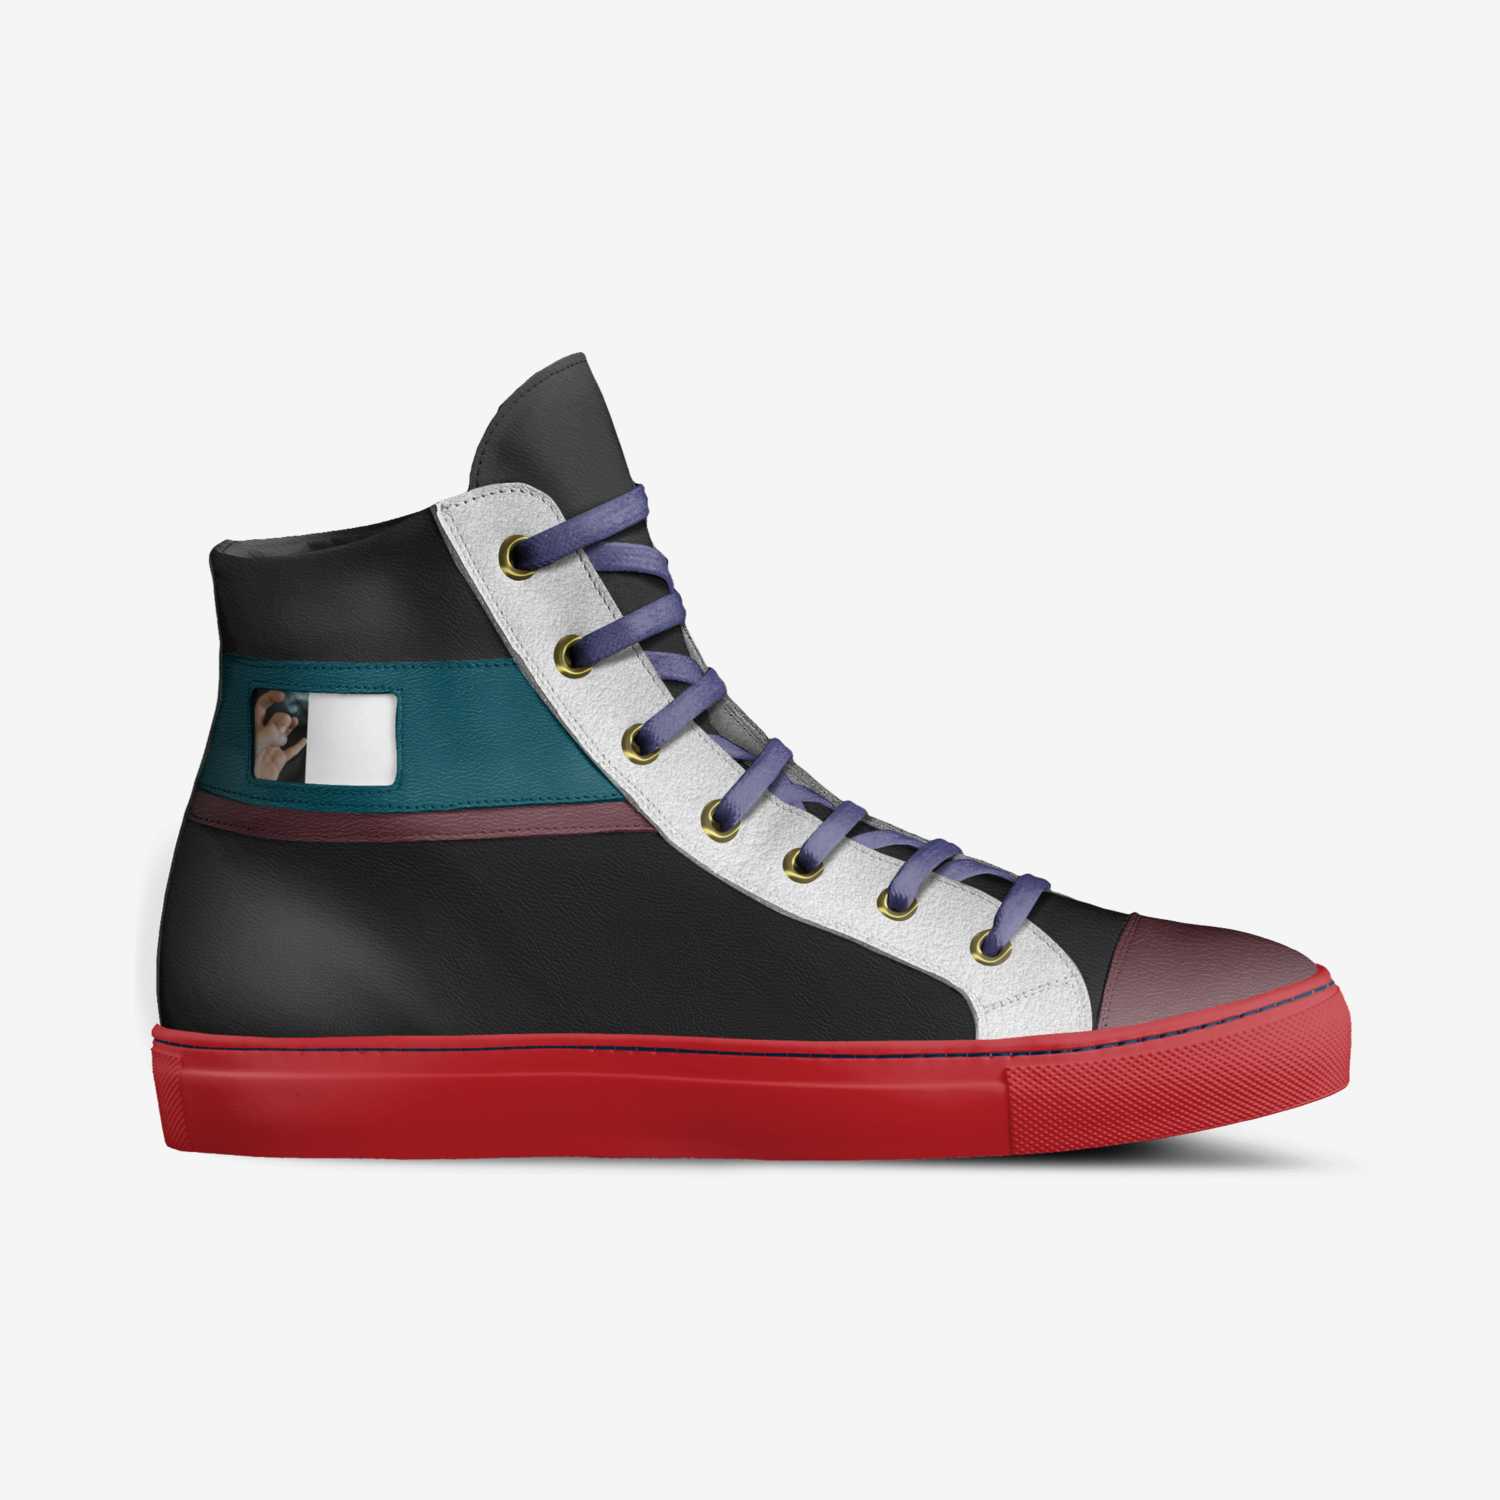 Gang gang Levy's  custom made in Italy shoes by Raphi | Side view